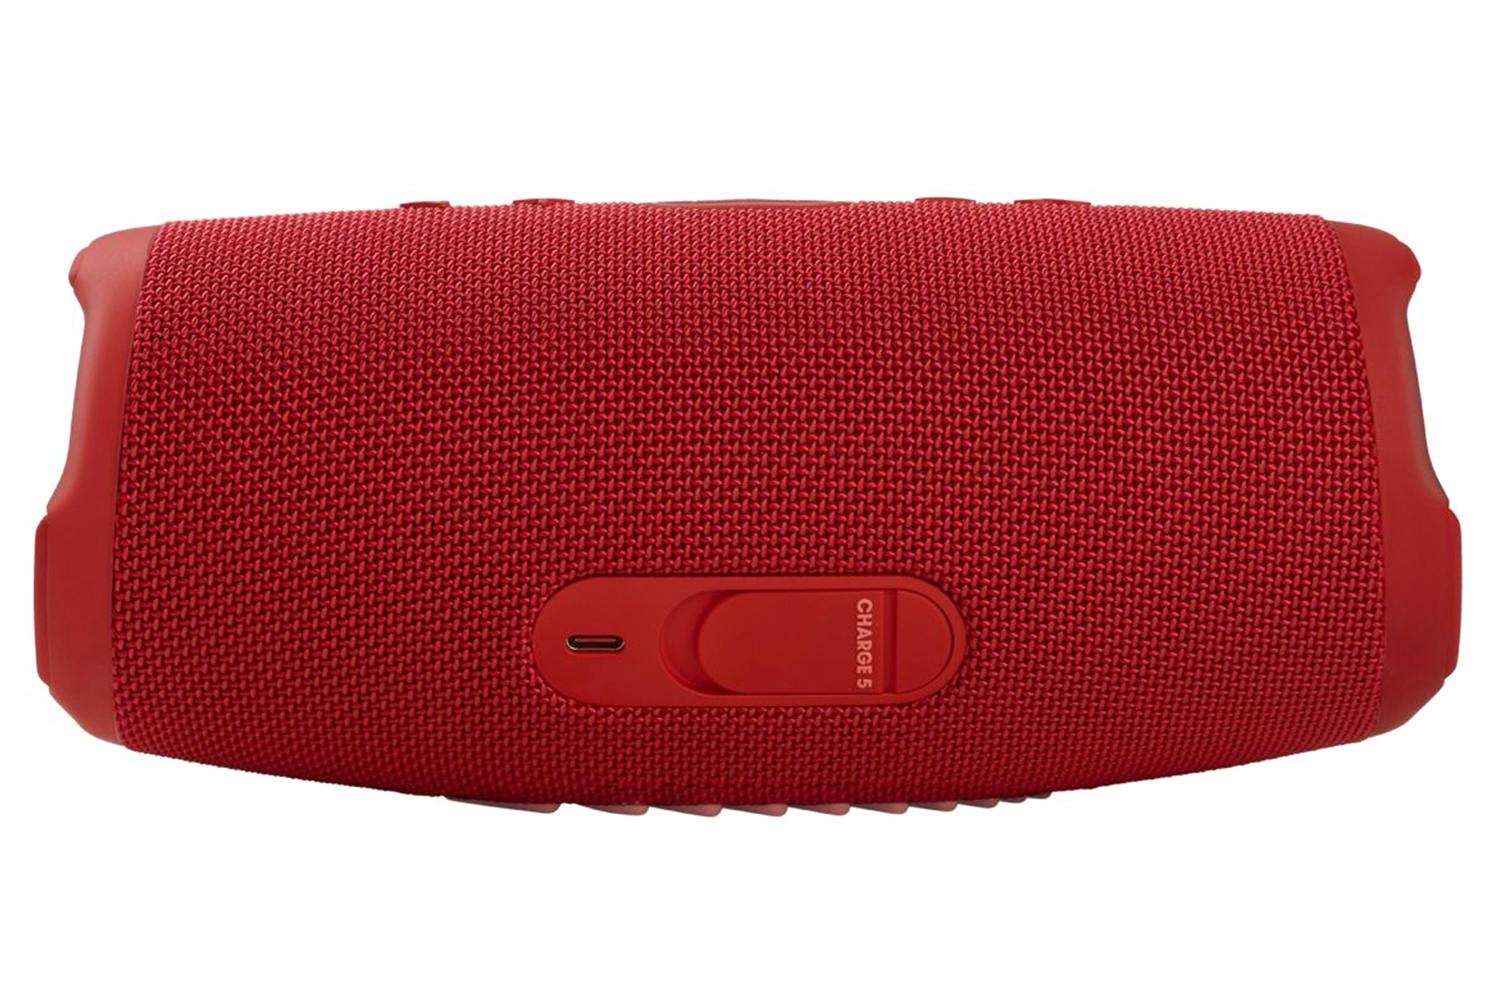  JBL Charge 5 Portable Wireless Bluetooth Speaker with IP67  Waterproof and USB Charge Out - Red, small : Electronics